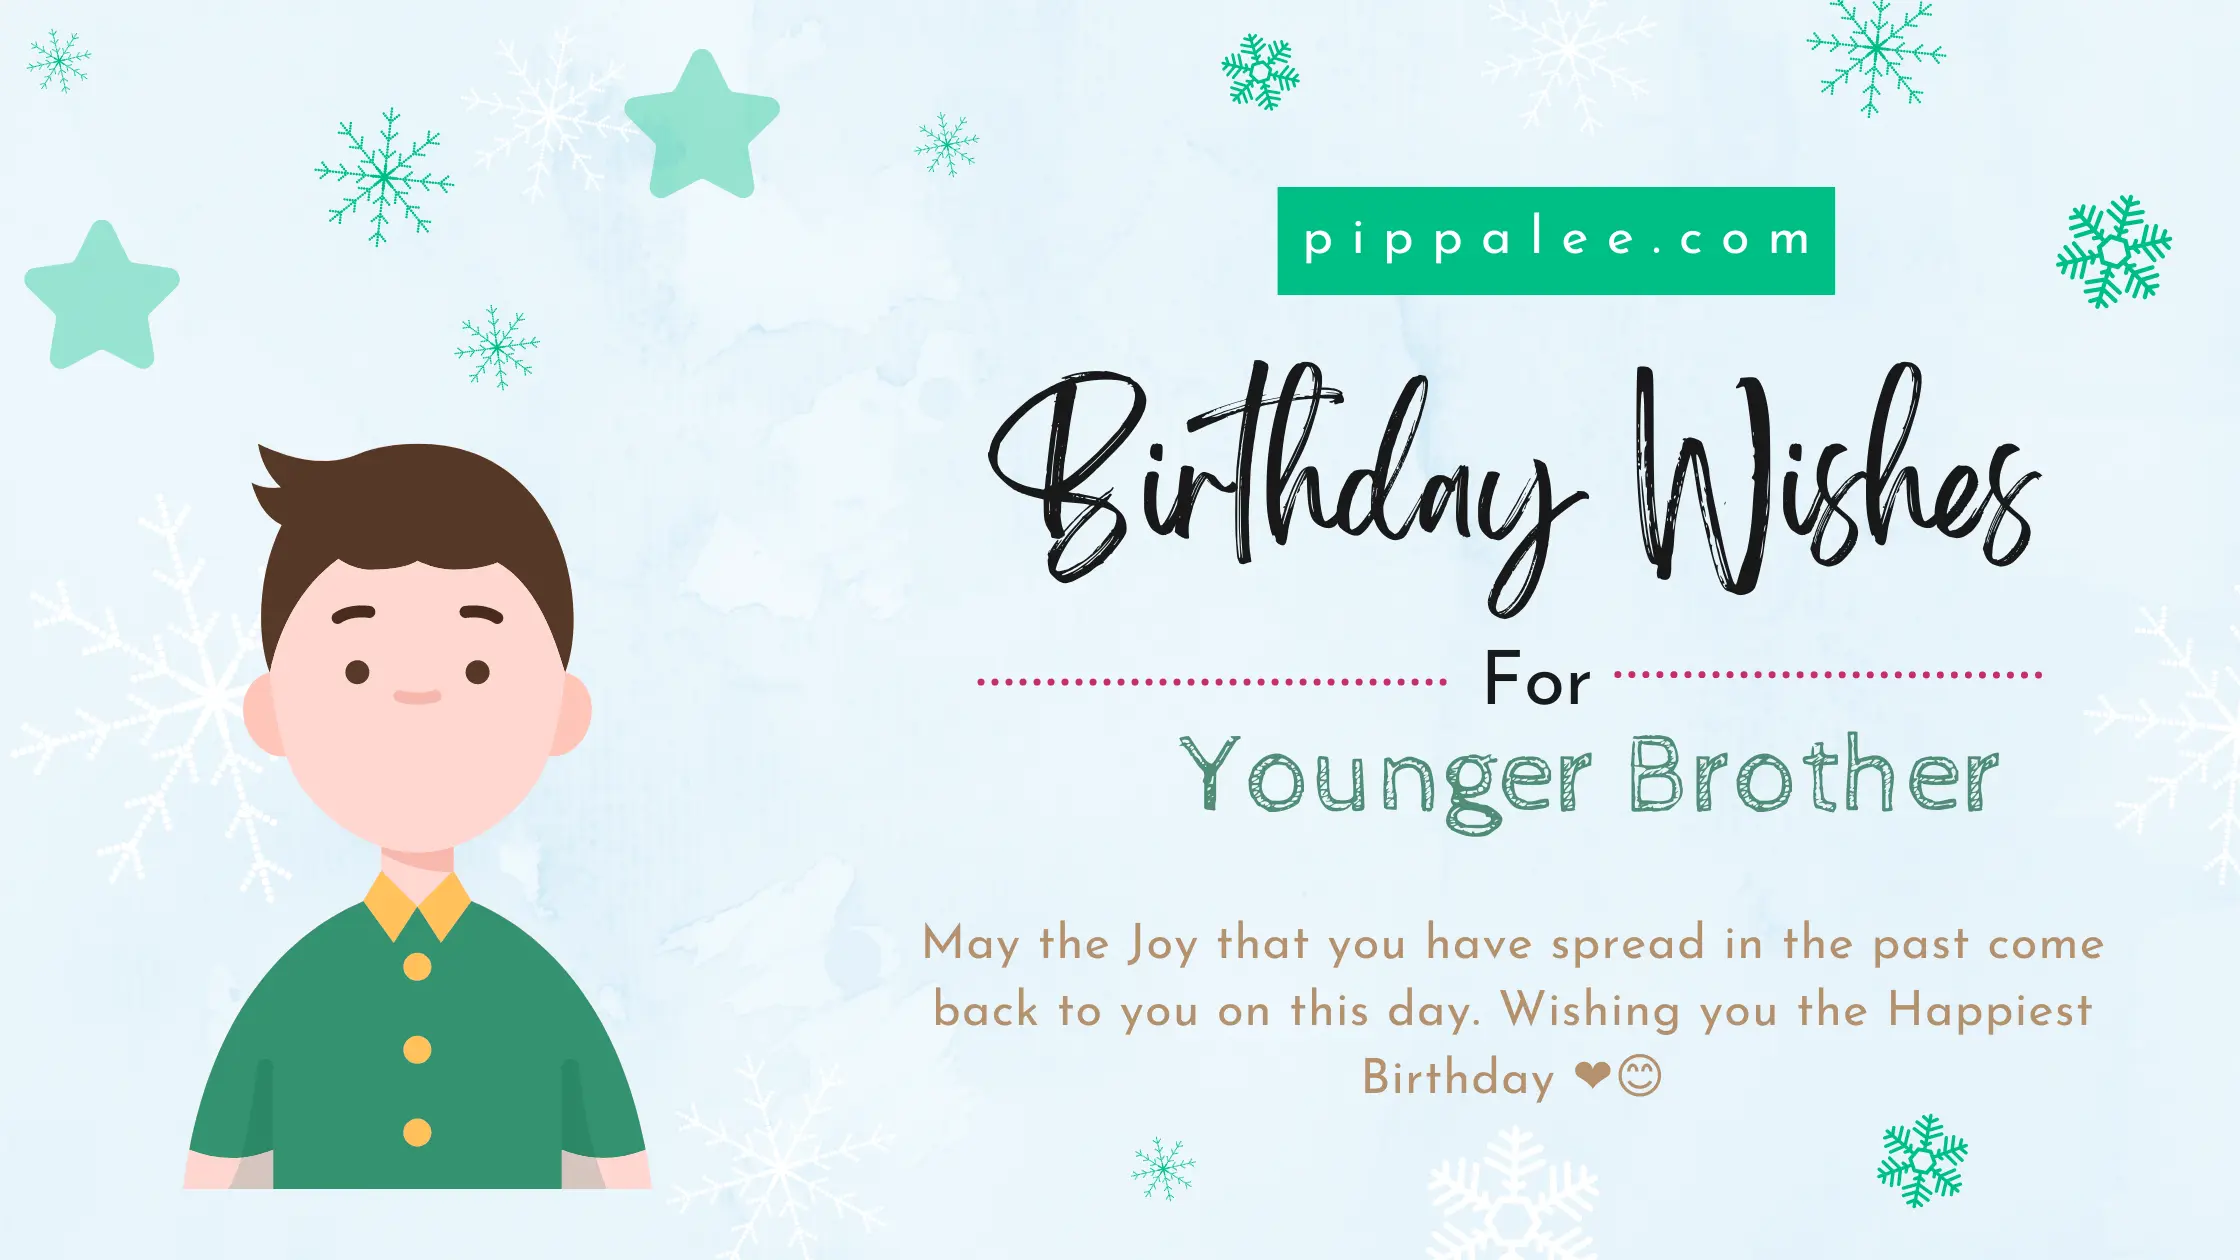 Birthday Wishes For Younger Brother - Cool Wishes